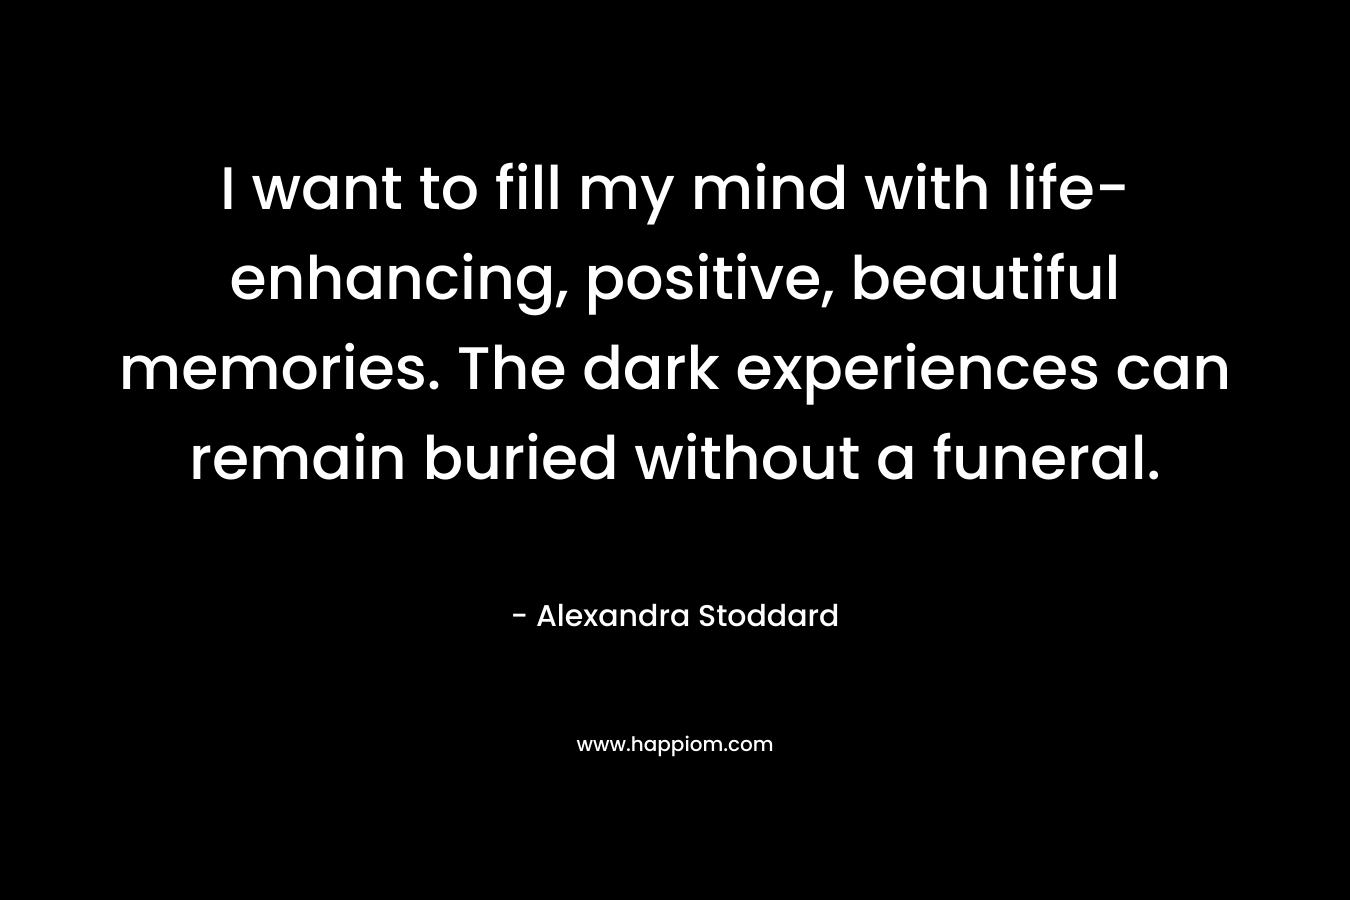 I want to fill my mind with life-enhancing, positive, beautiful memories. The dark experiences can remain buried without a funeral.